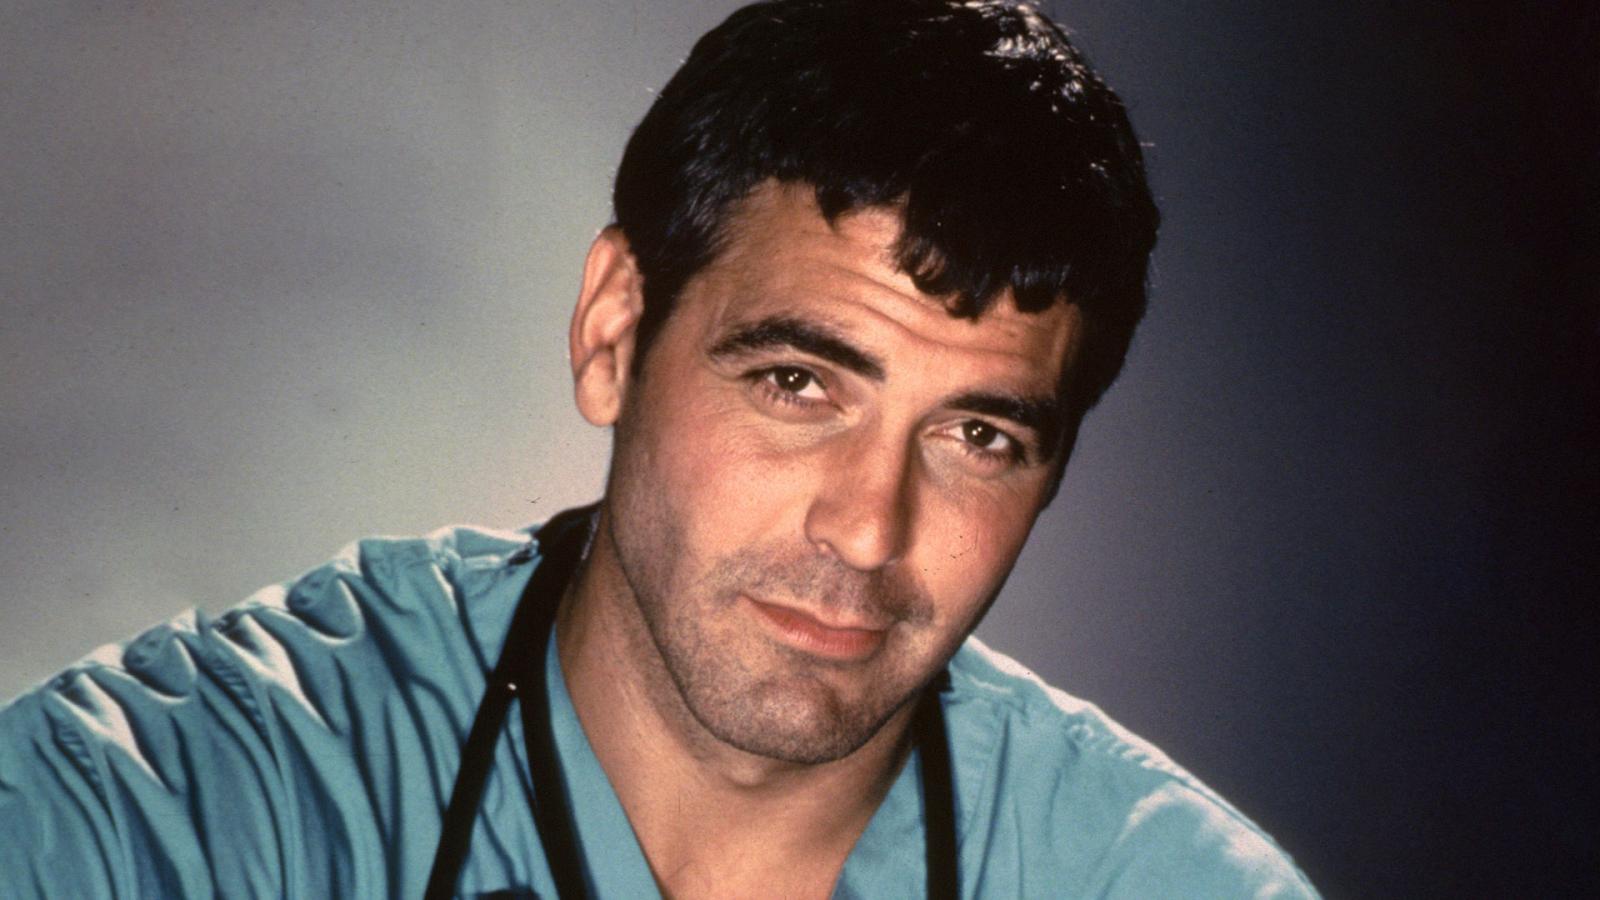 Move Over, McDreamy: Ranking the 8 Hottest Male Doctors on TV - image 8